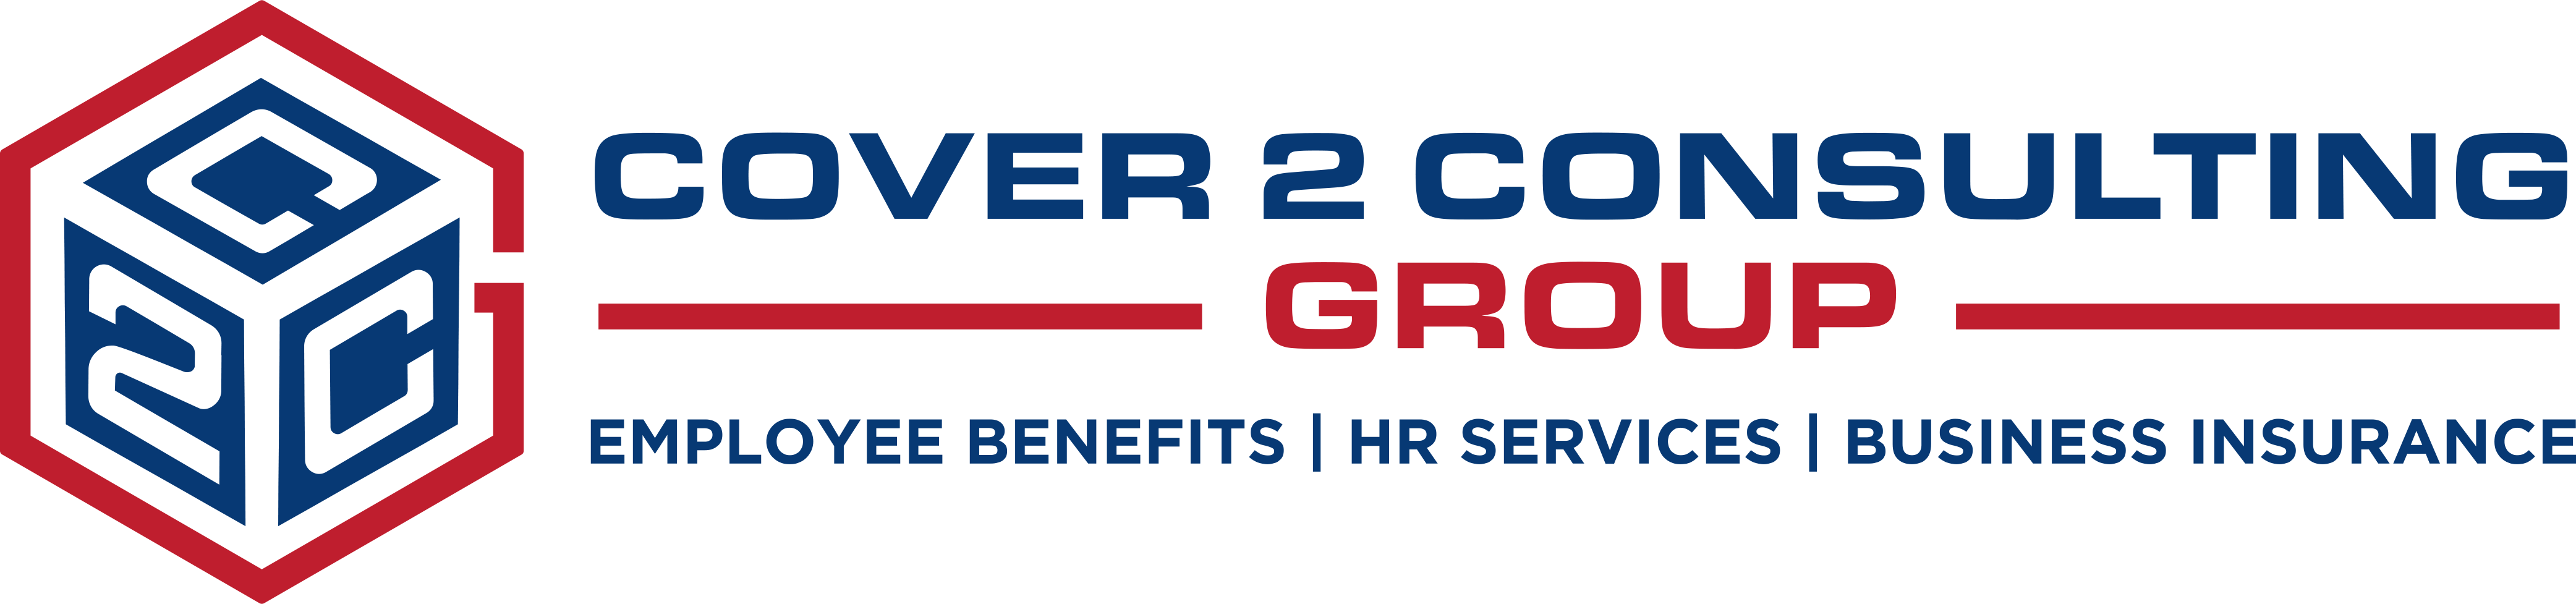 Cover 2 Consulting Group